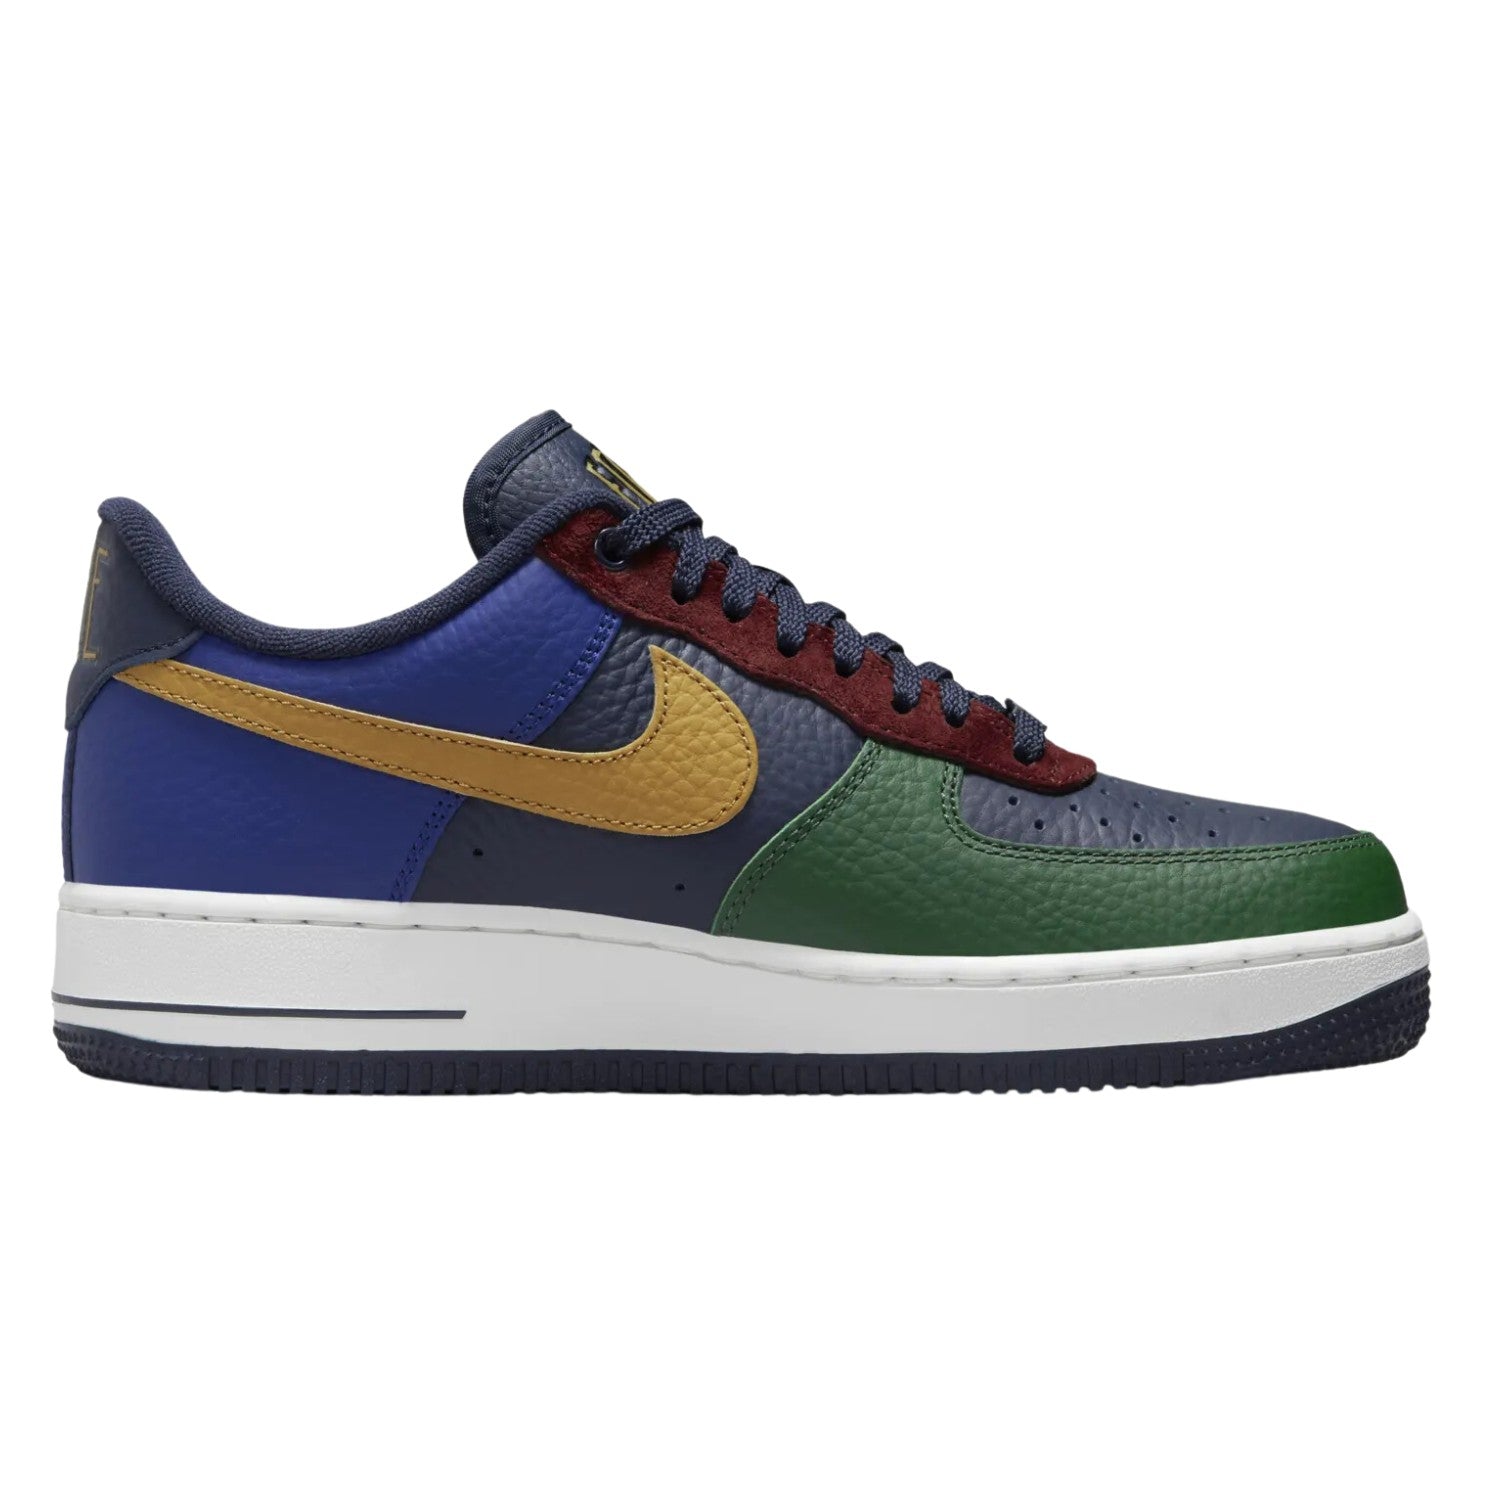 Nike Air Force 1 '07 Lx Mens Style : Dr0148-300